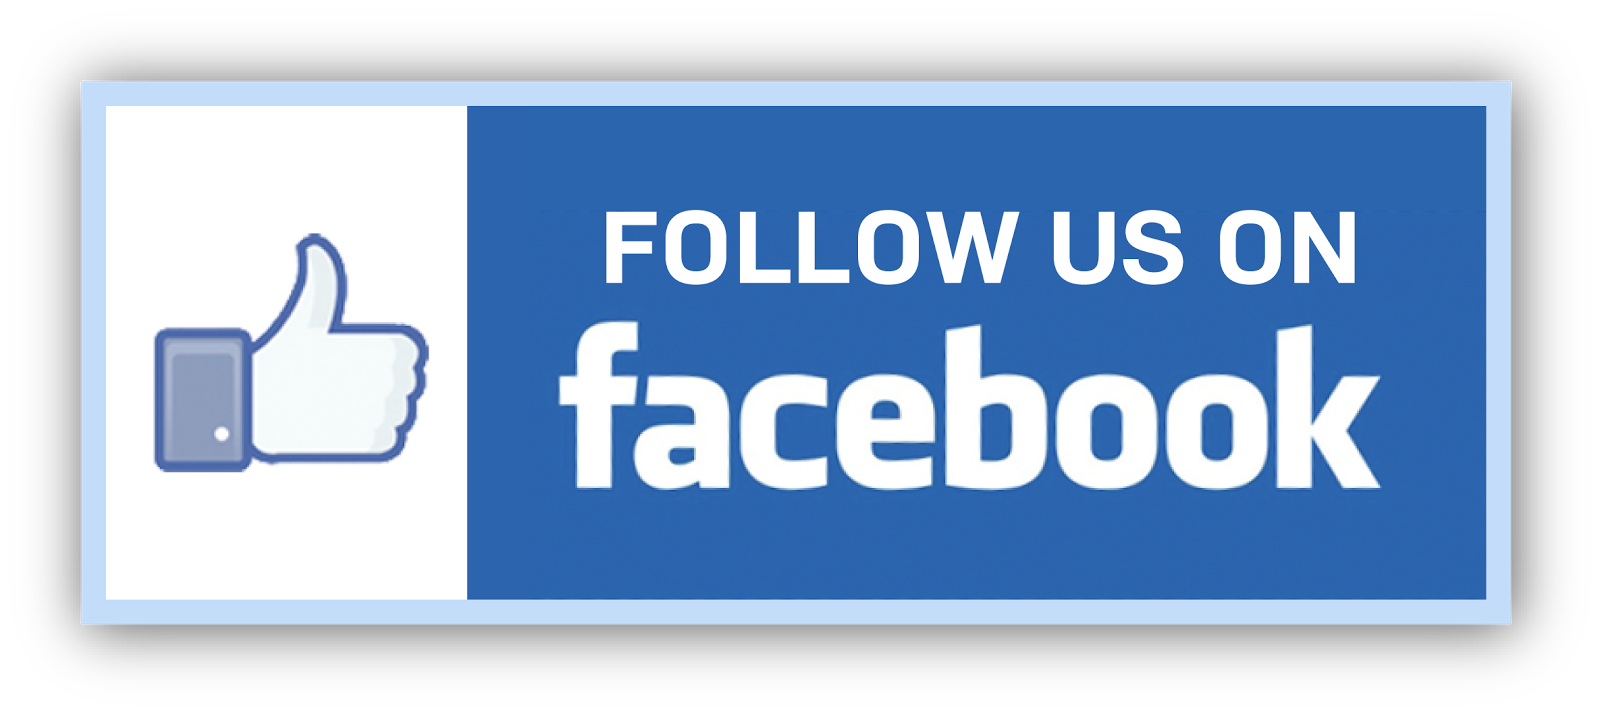 JOIN OUR FACEBOOK PAGE